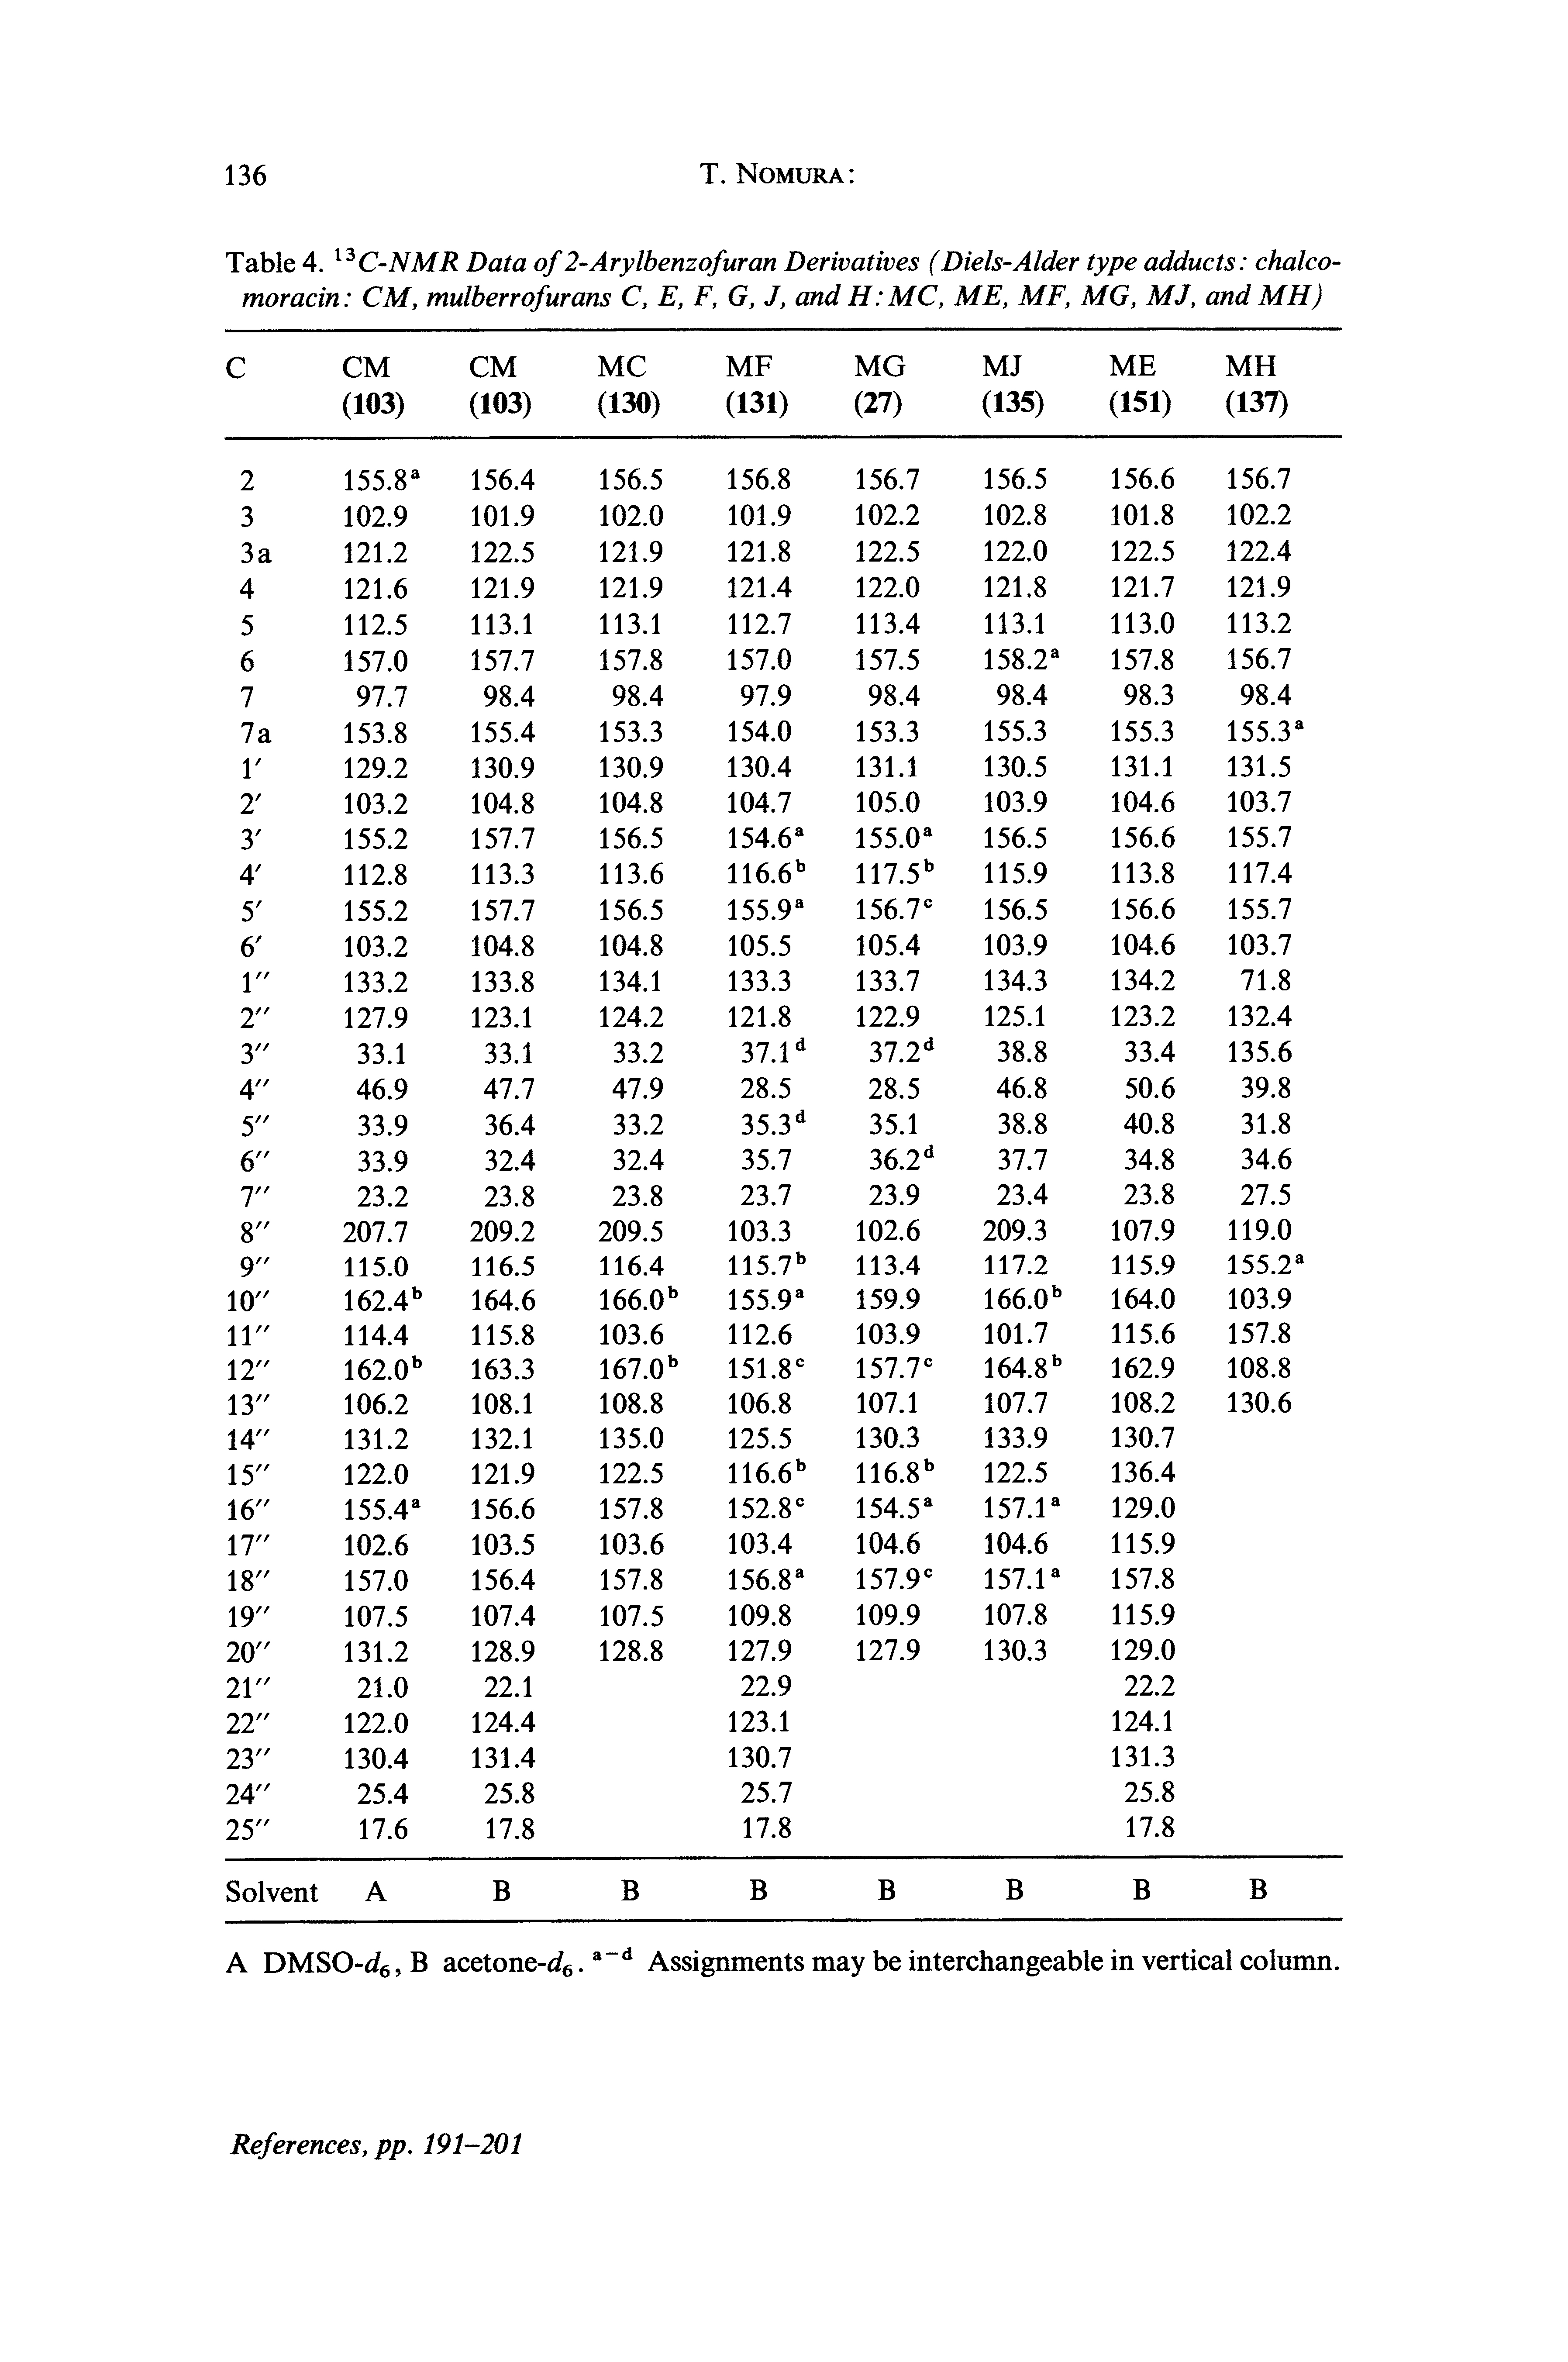 Table 4. C-NMR Data of 2-Arylbenzofuran Derivatives (Diels-Alder type adducts chalco-moracin CM, mulberrofurans C, E, F, G, J, and H MC, ME, ME, MG, MJ, and MH)...